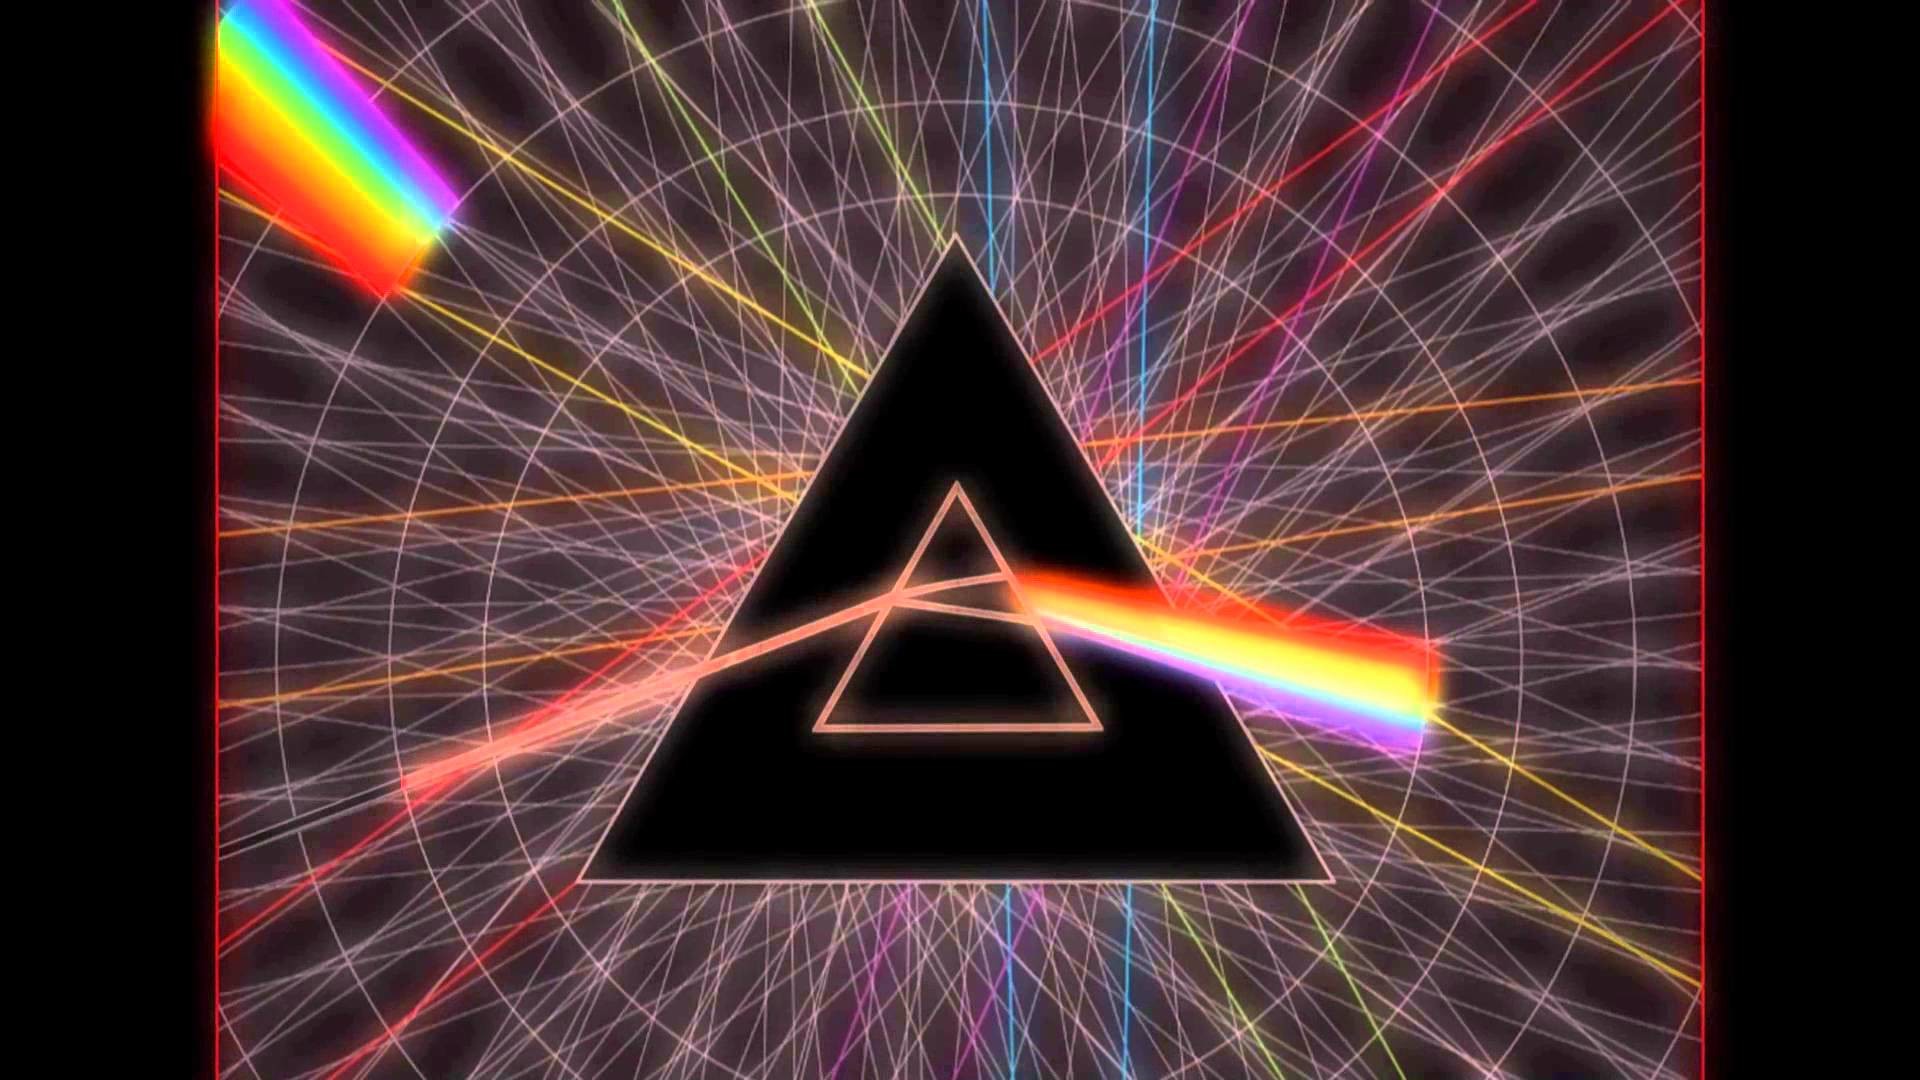 1920x1080 40th ANNIVERSARY ARTWORK COVER - PINK FLOYD PRISM PROJECT 1973 - 2013 -  Storm Thorgerson - YouTube